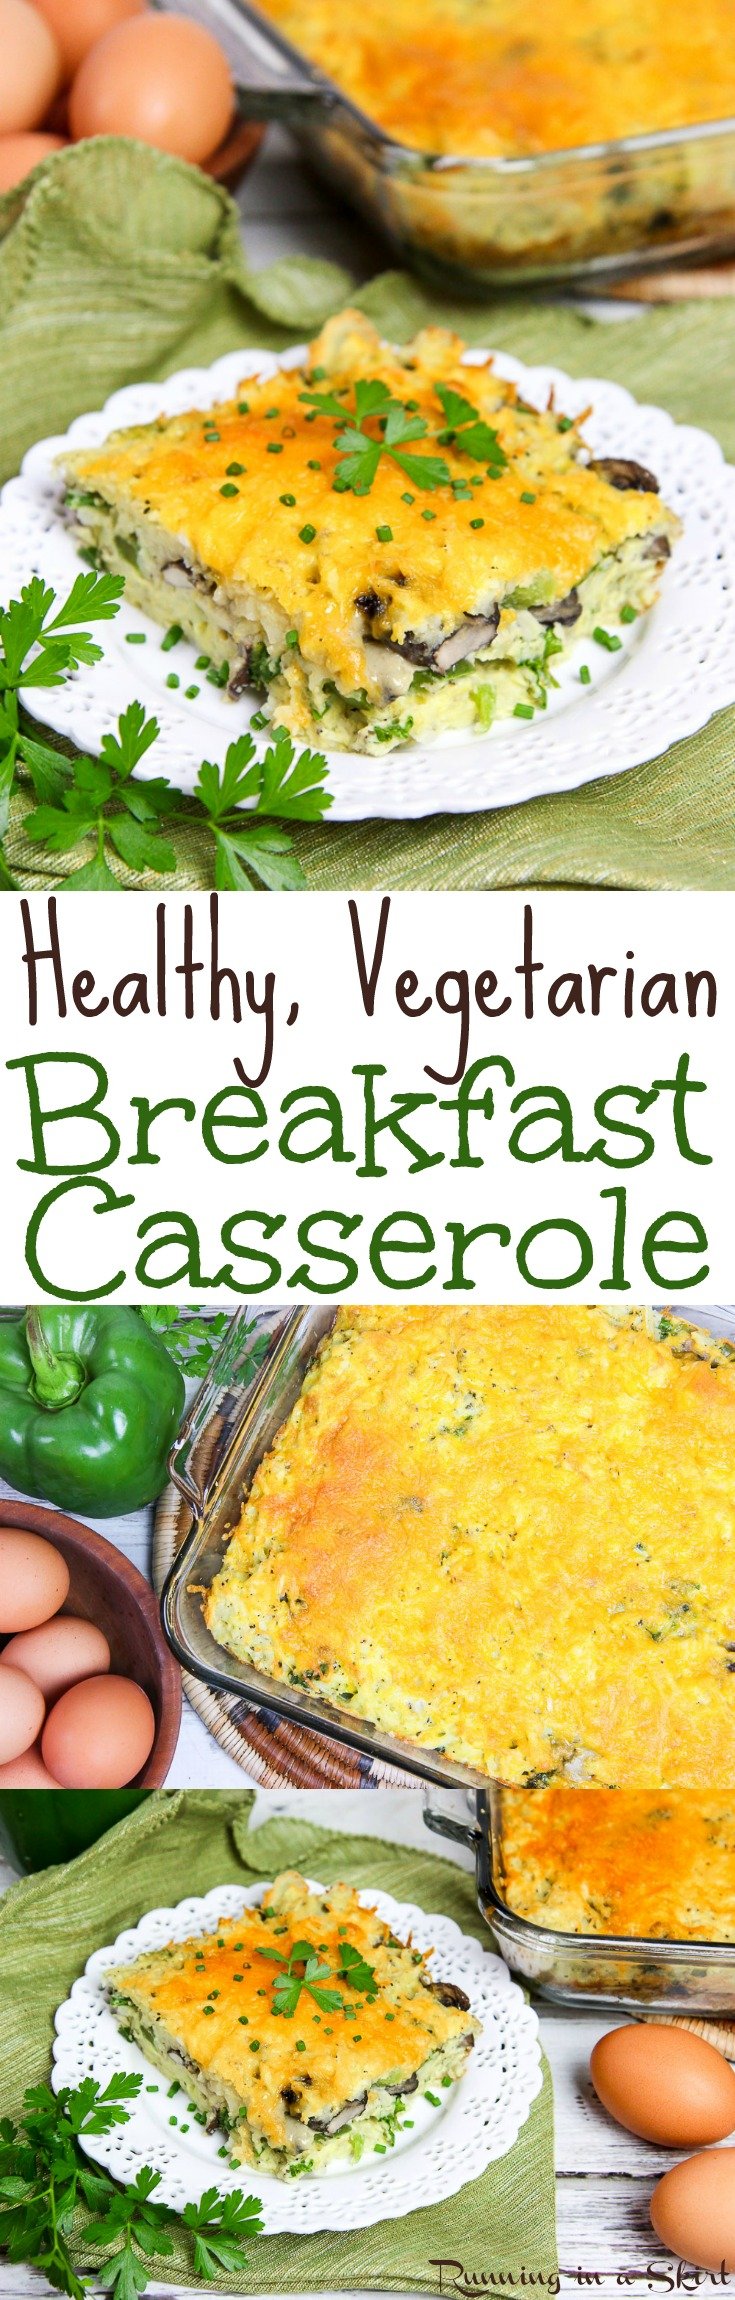 Healthy Vegetarian Breakfast Casserole recipe.  Can make ahead the night before!  Easy & simple with no pre cooking before you assemble the dish.  Perfect for Christmas Morning or Thanksgiving.  Uses hashbrowns, eggs milk and is packed with fresh veggies that you can customize.  SO delicious! / Running in a Skirt via @juliewunder